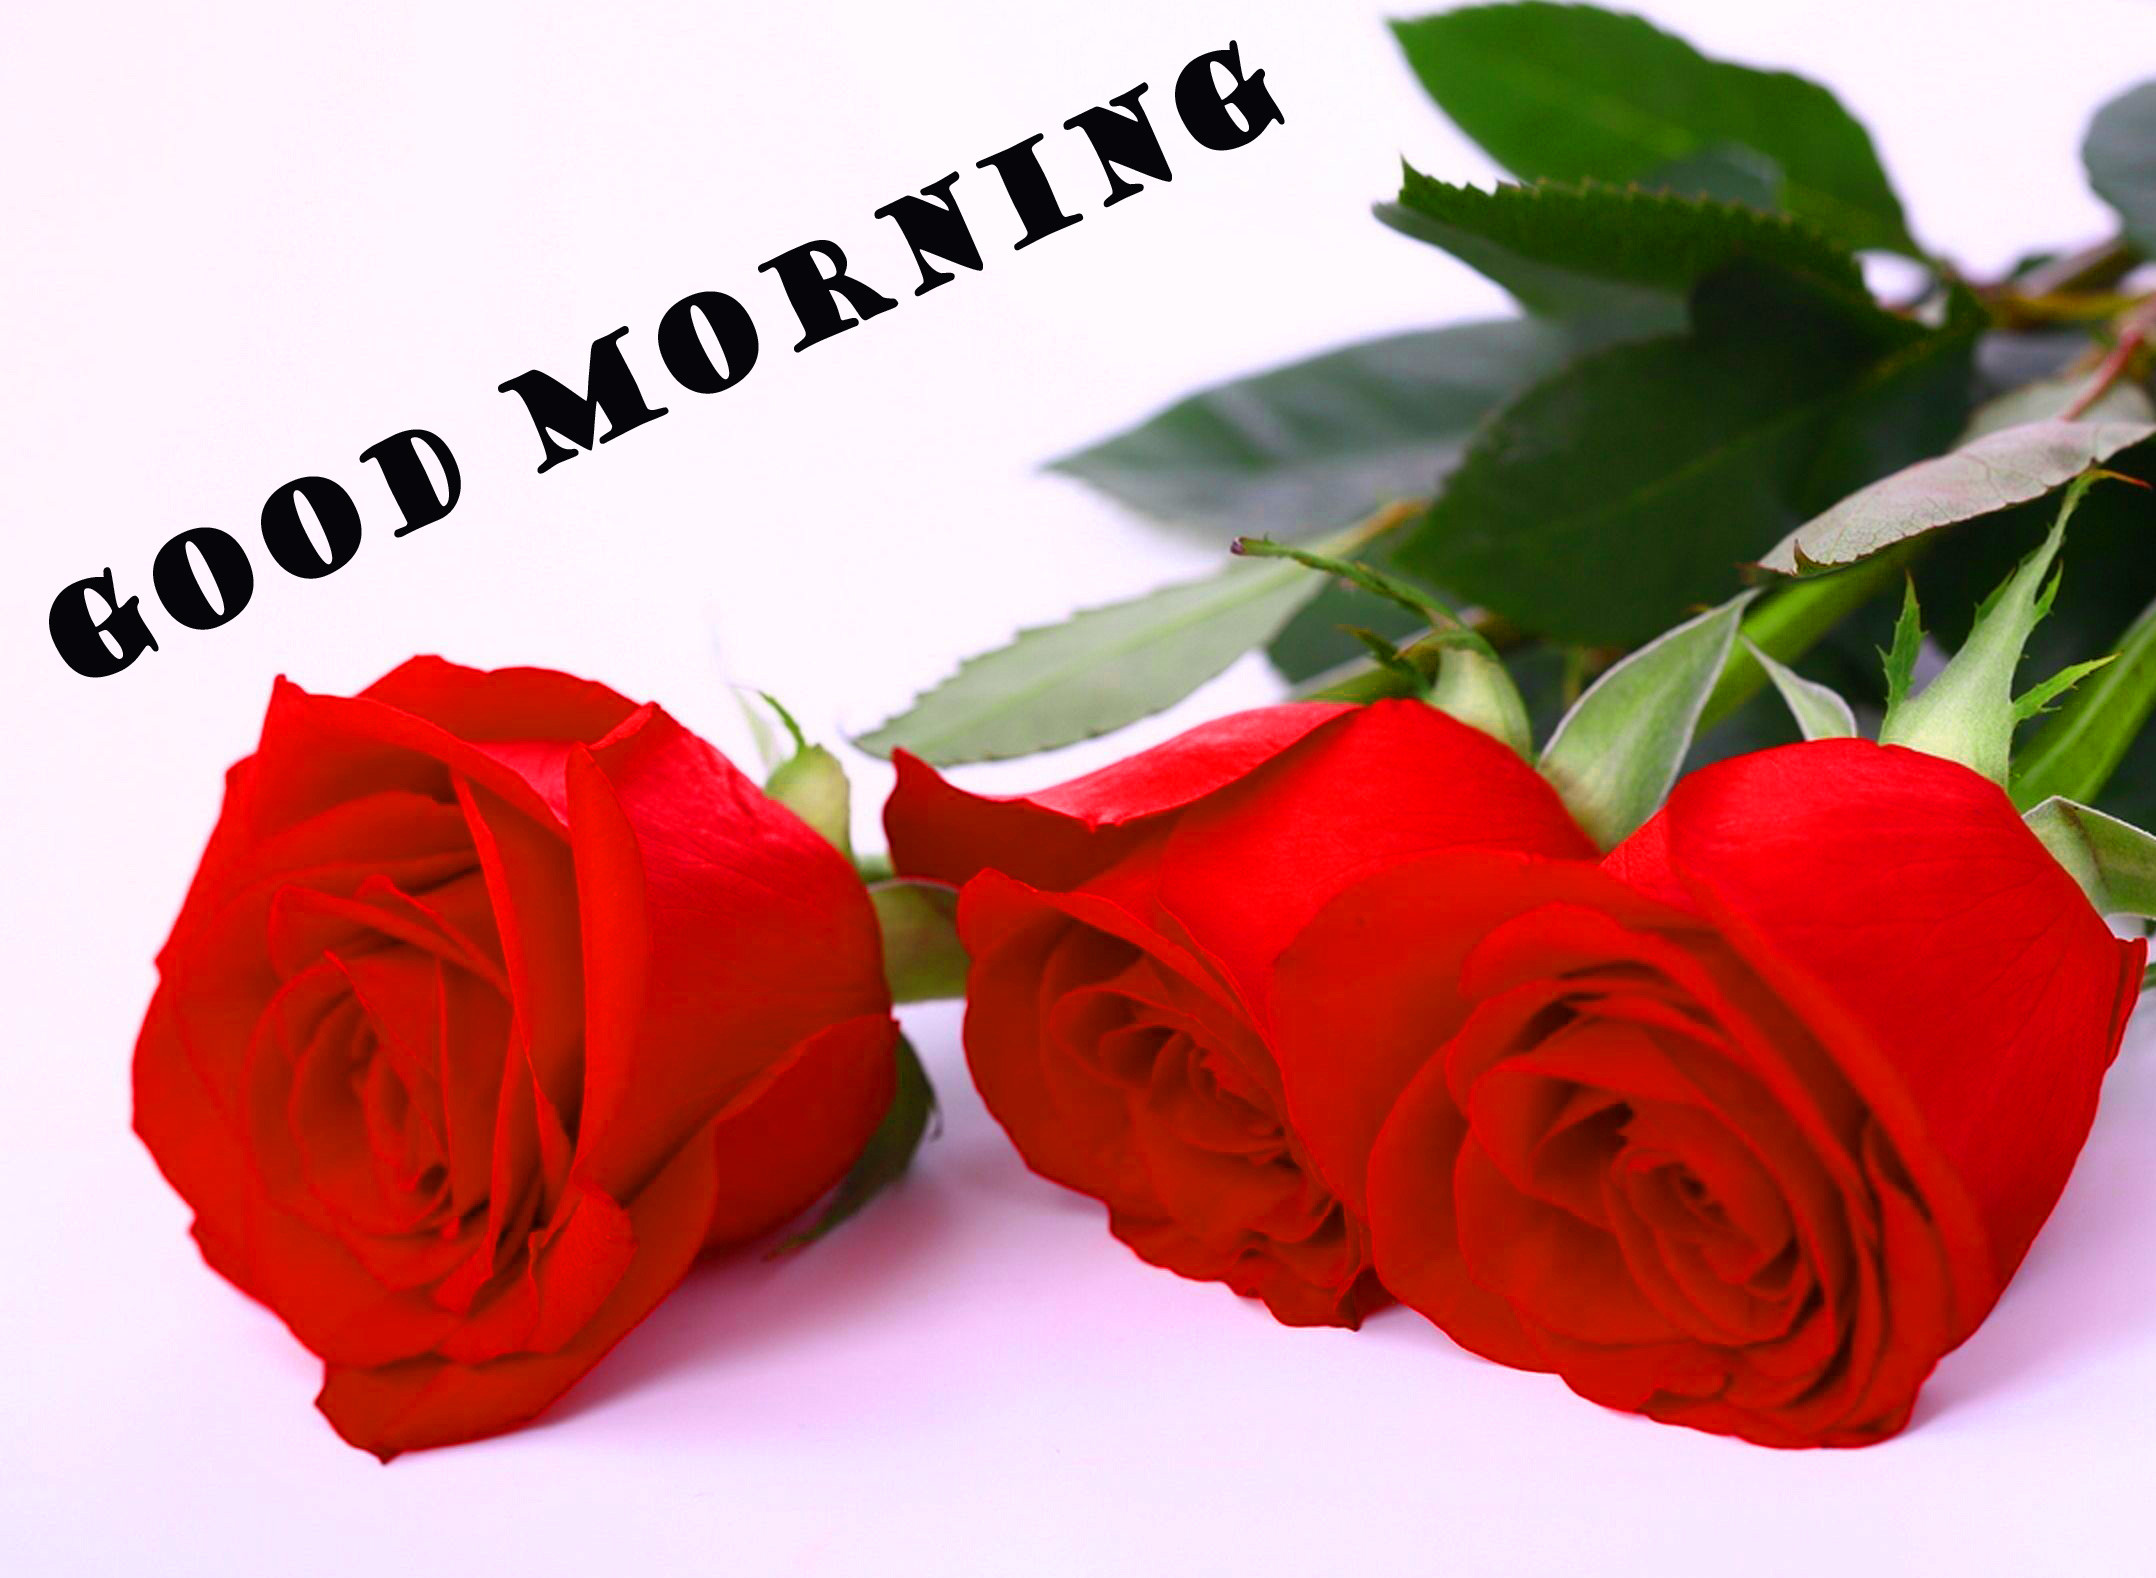 Good Morning Red Rose Wallpaper Pictures Images Hd - Love Rose Images Free  Download - 2156x1578 Wallpaper 